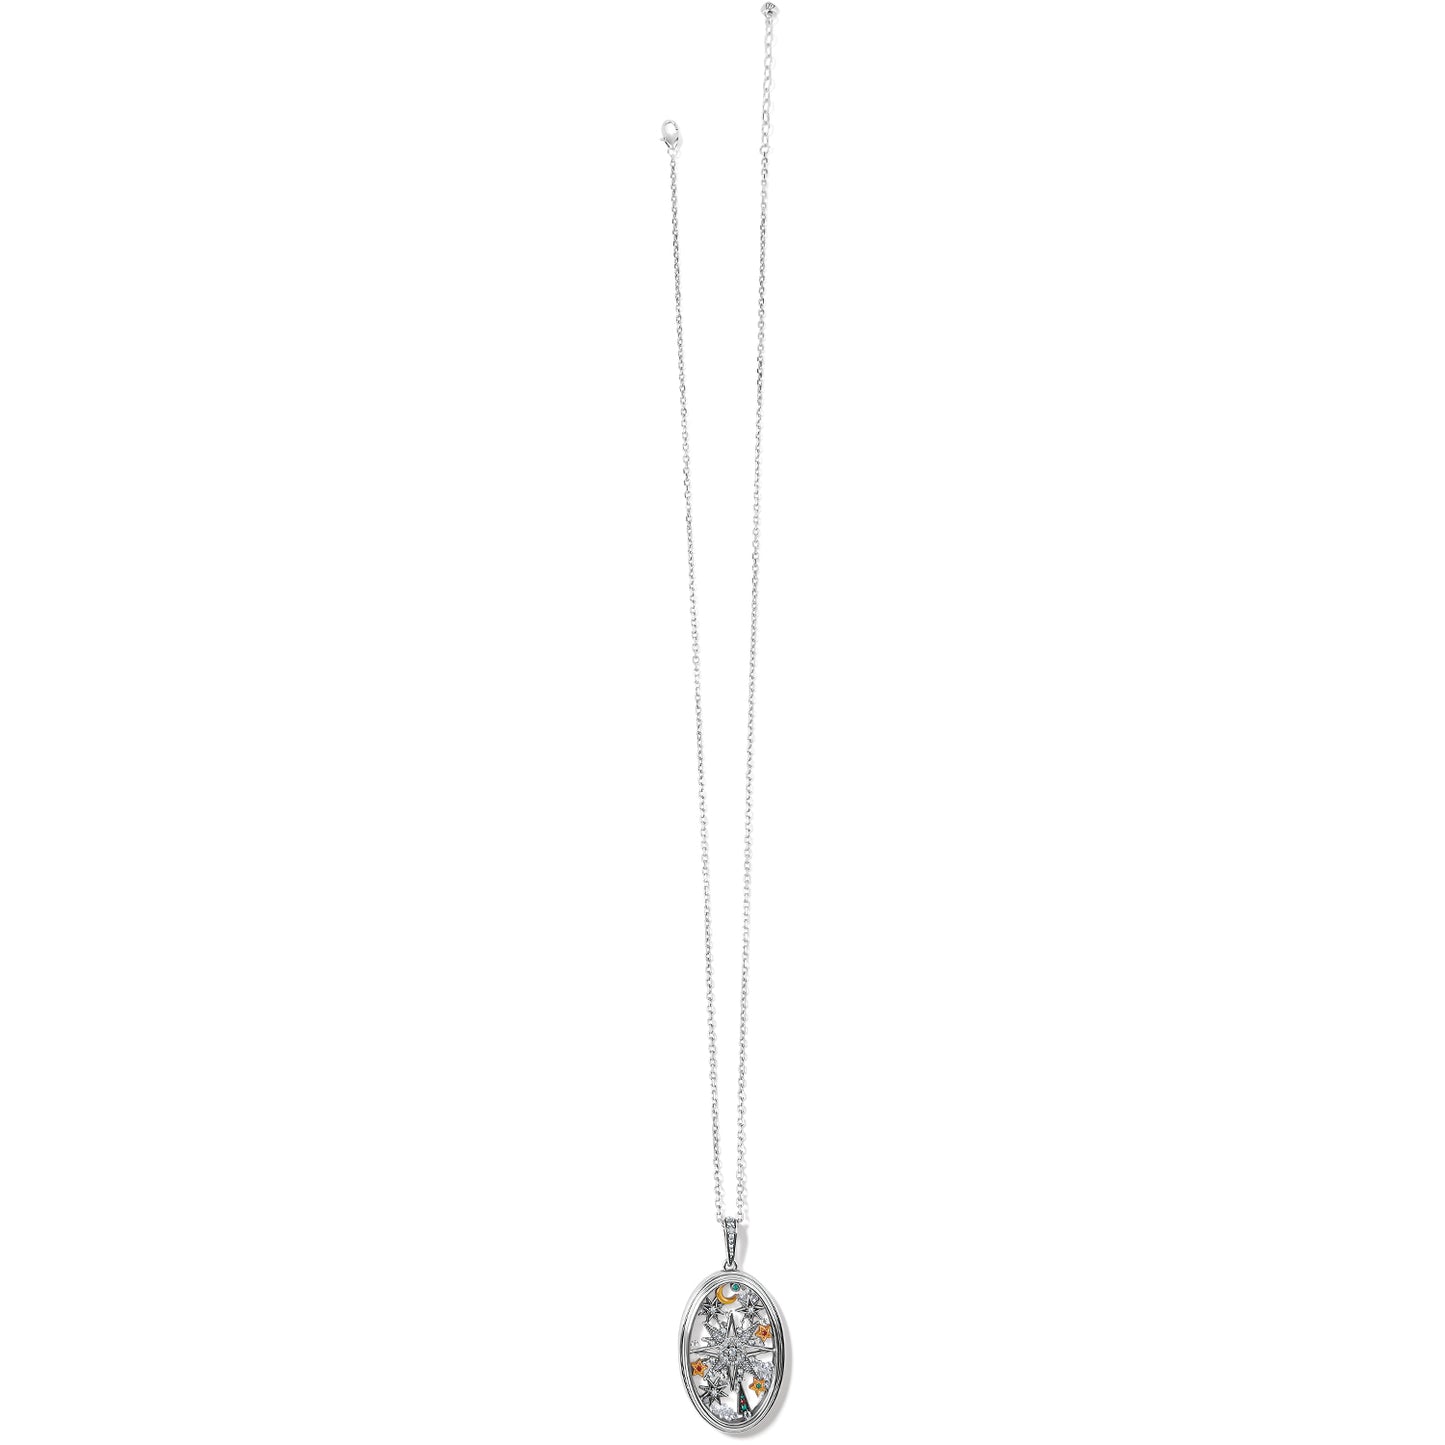 Christmas Magic Convertible Necklace features floating stars, moon, and tree with clear, red, and green crystals between glass and silver rimmed pendant. Has adjustable convertible chain. Shop at The Painted Cottage in Edgewater, MD.